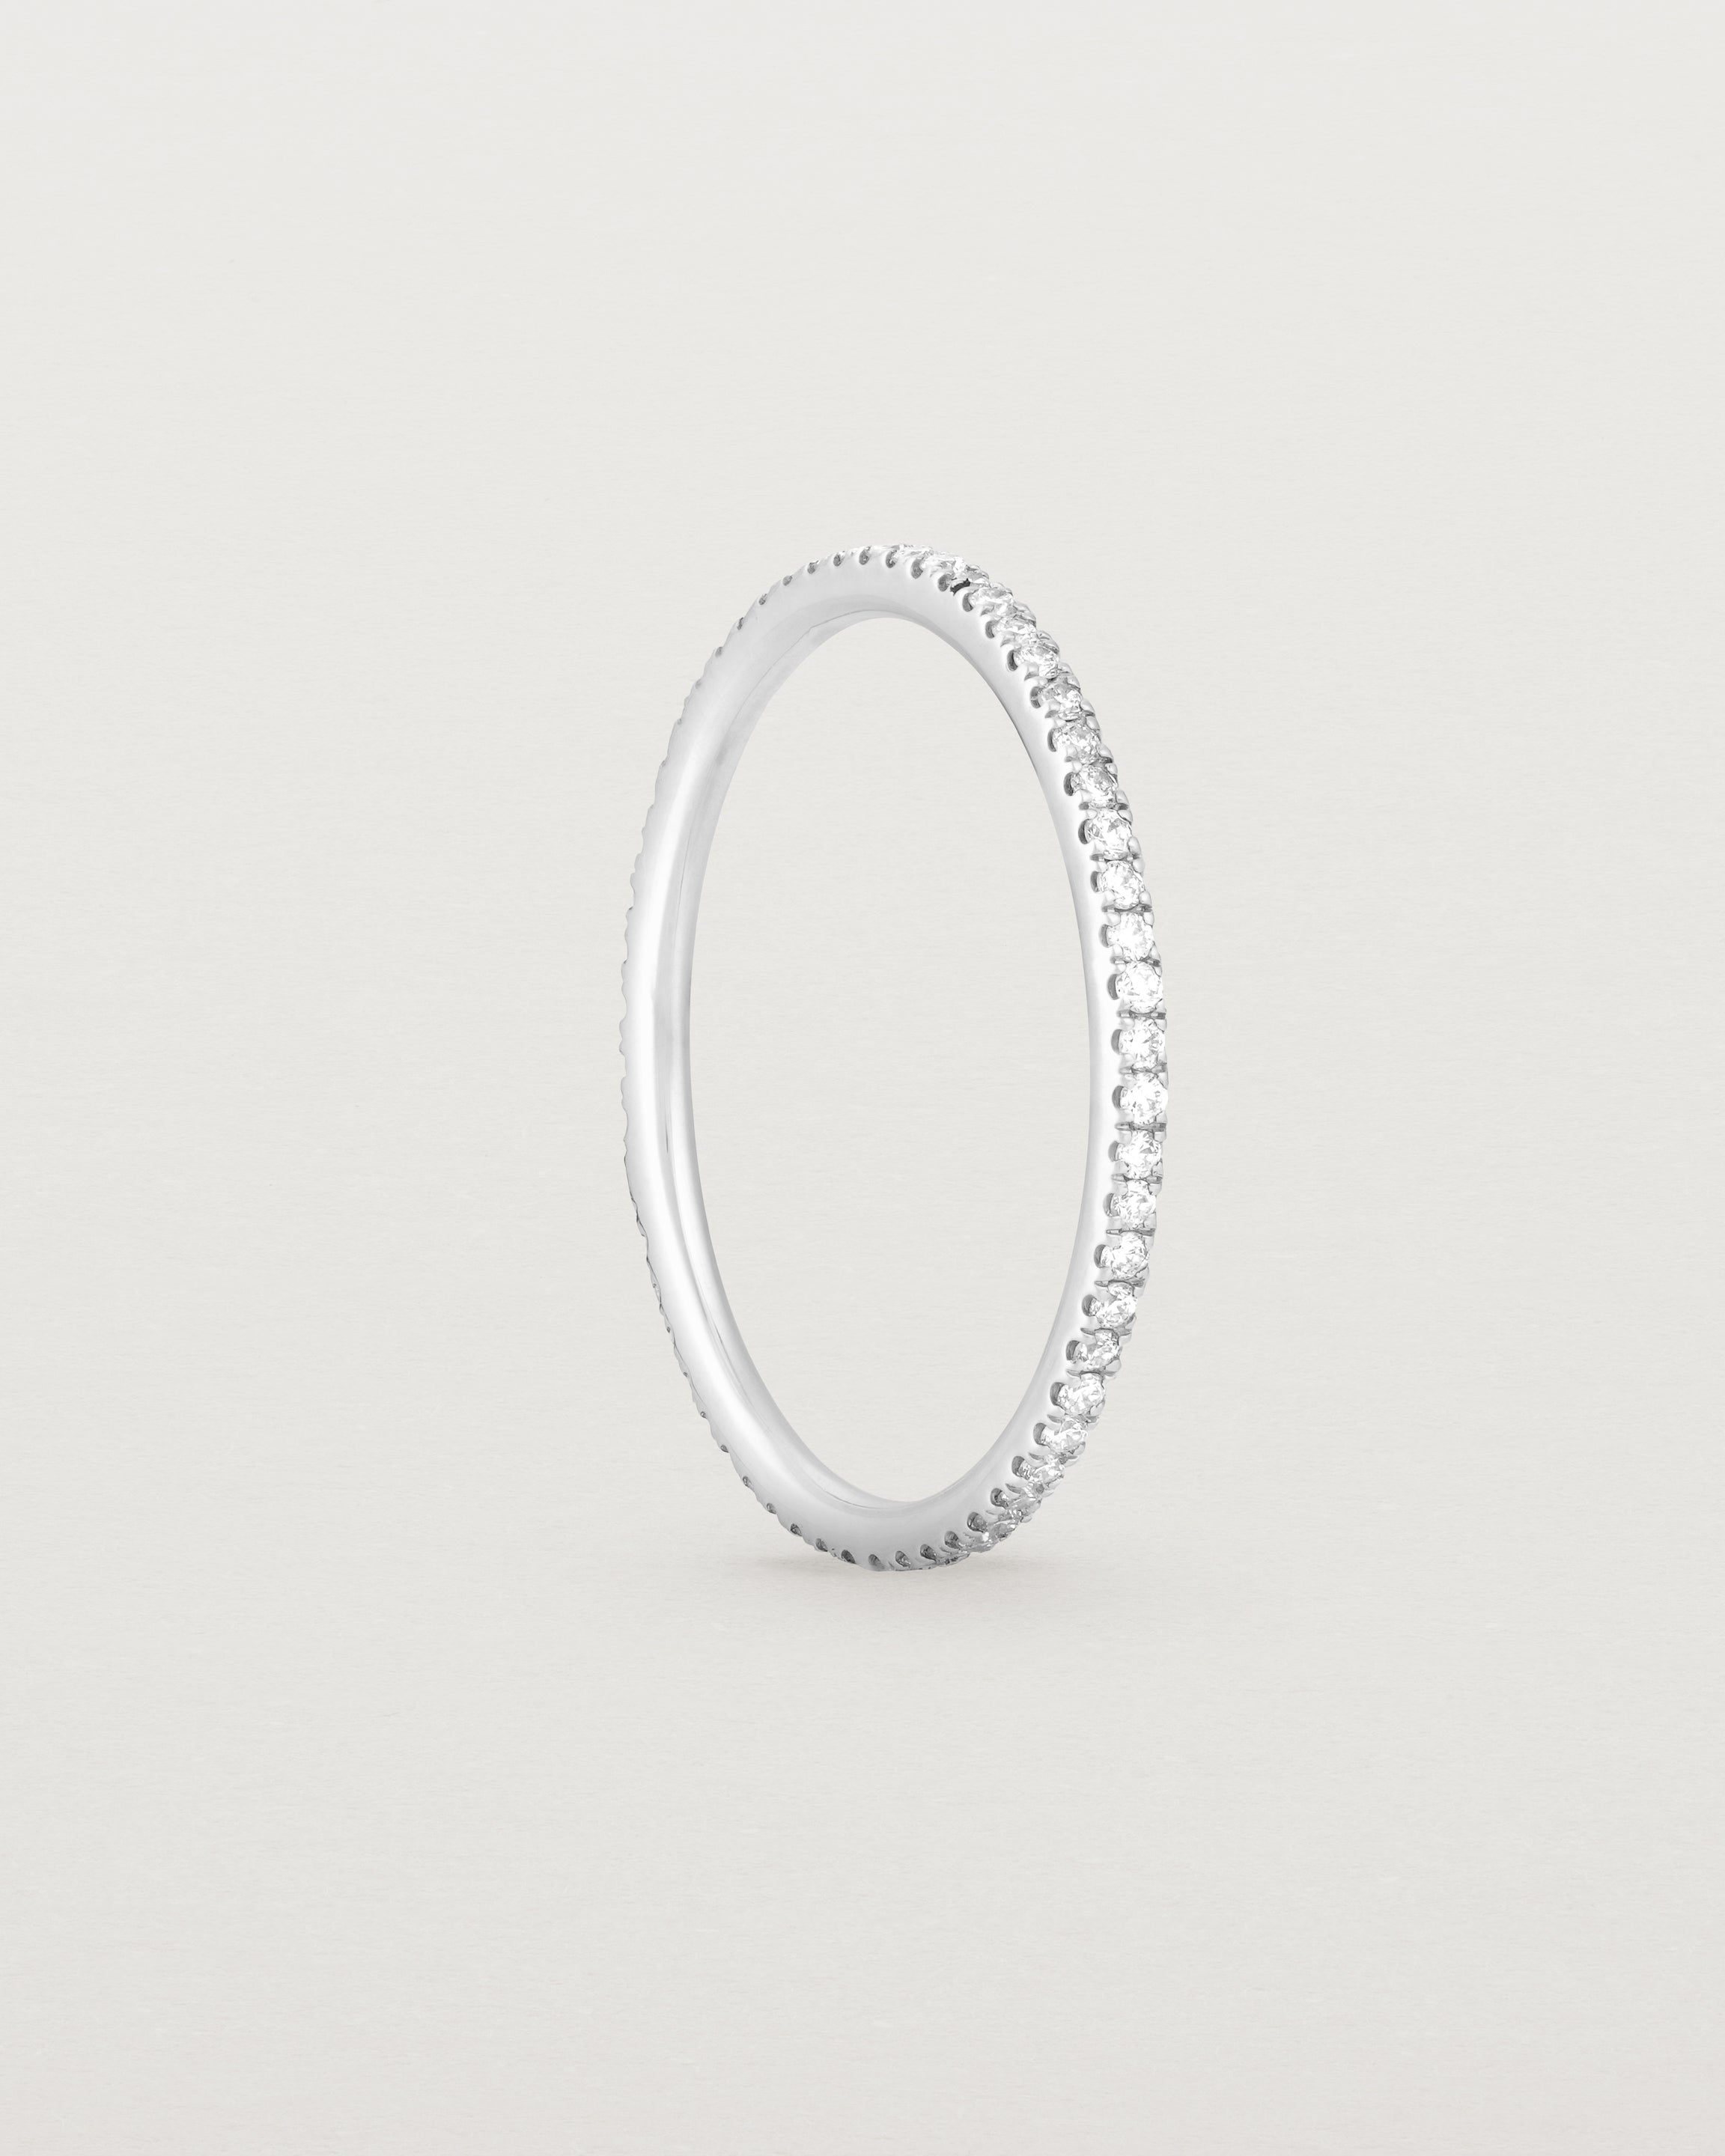 Standing view of a full white gold band featuring white diamonds